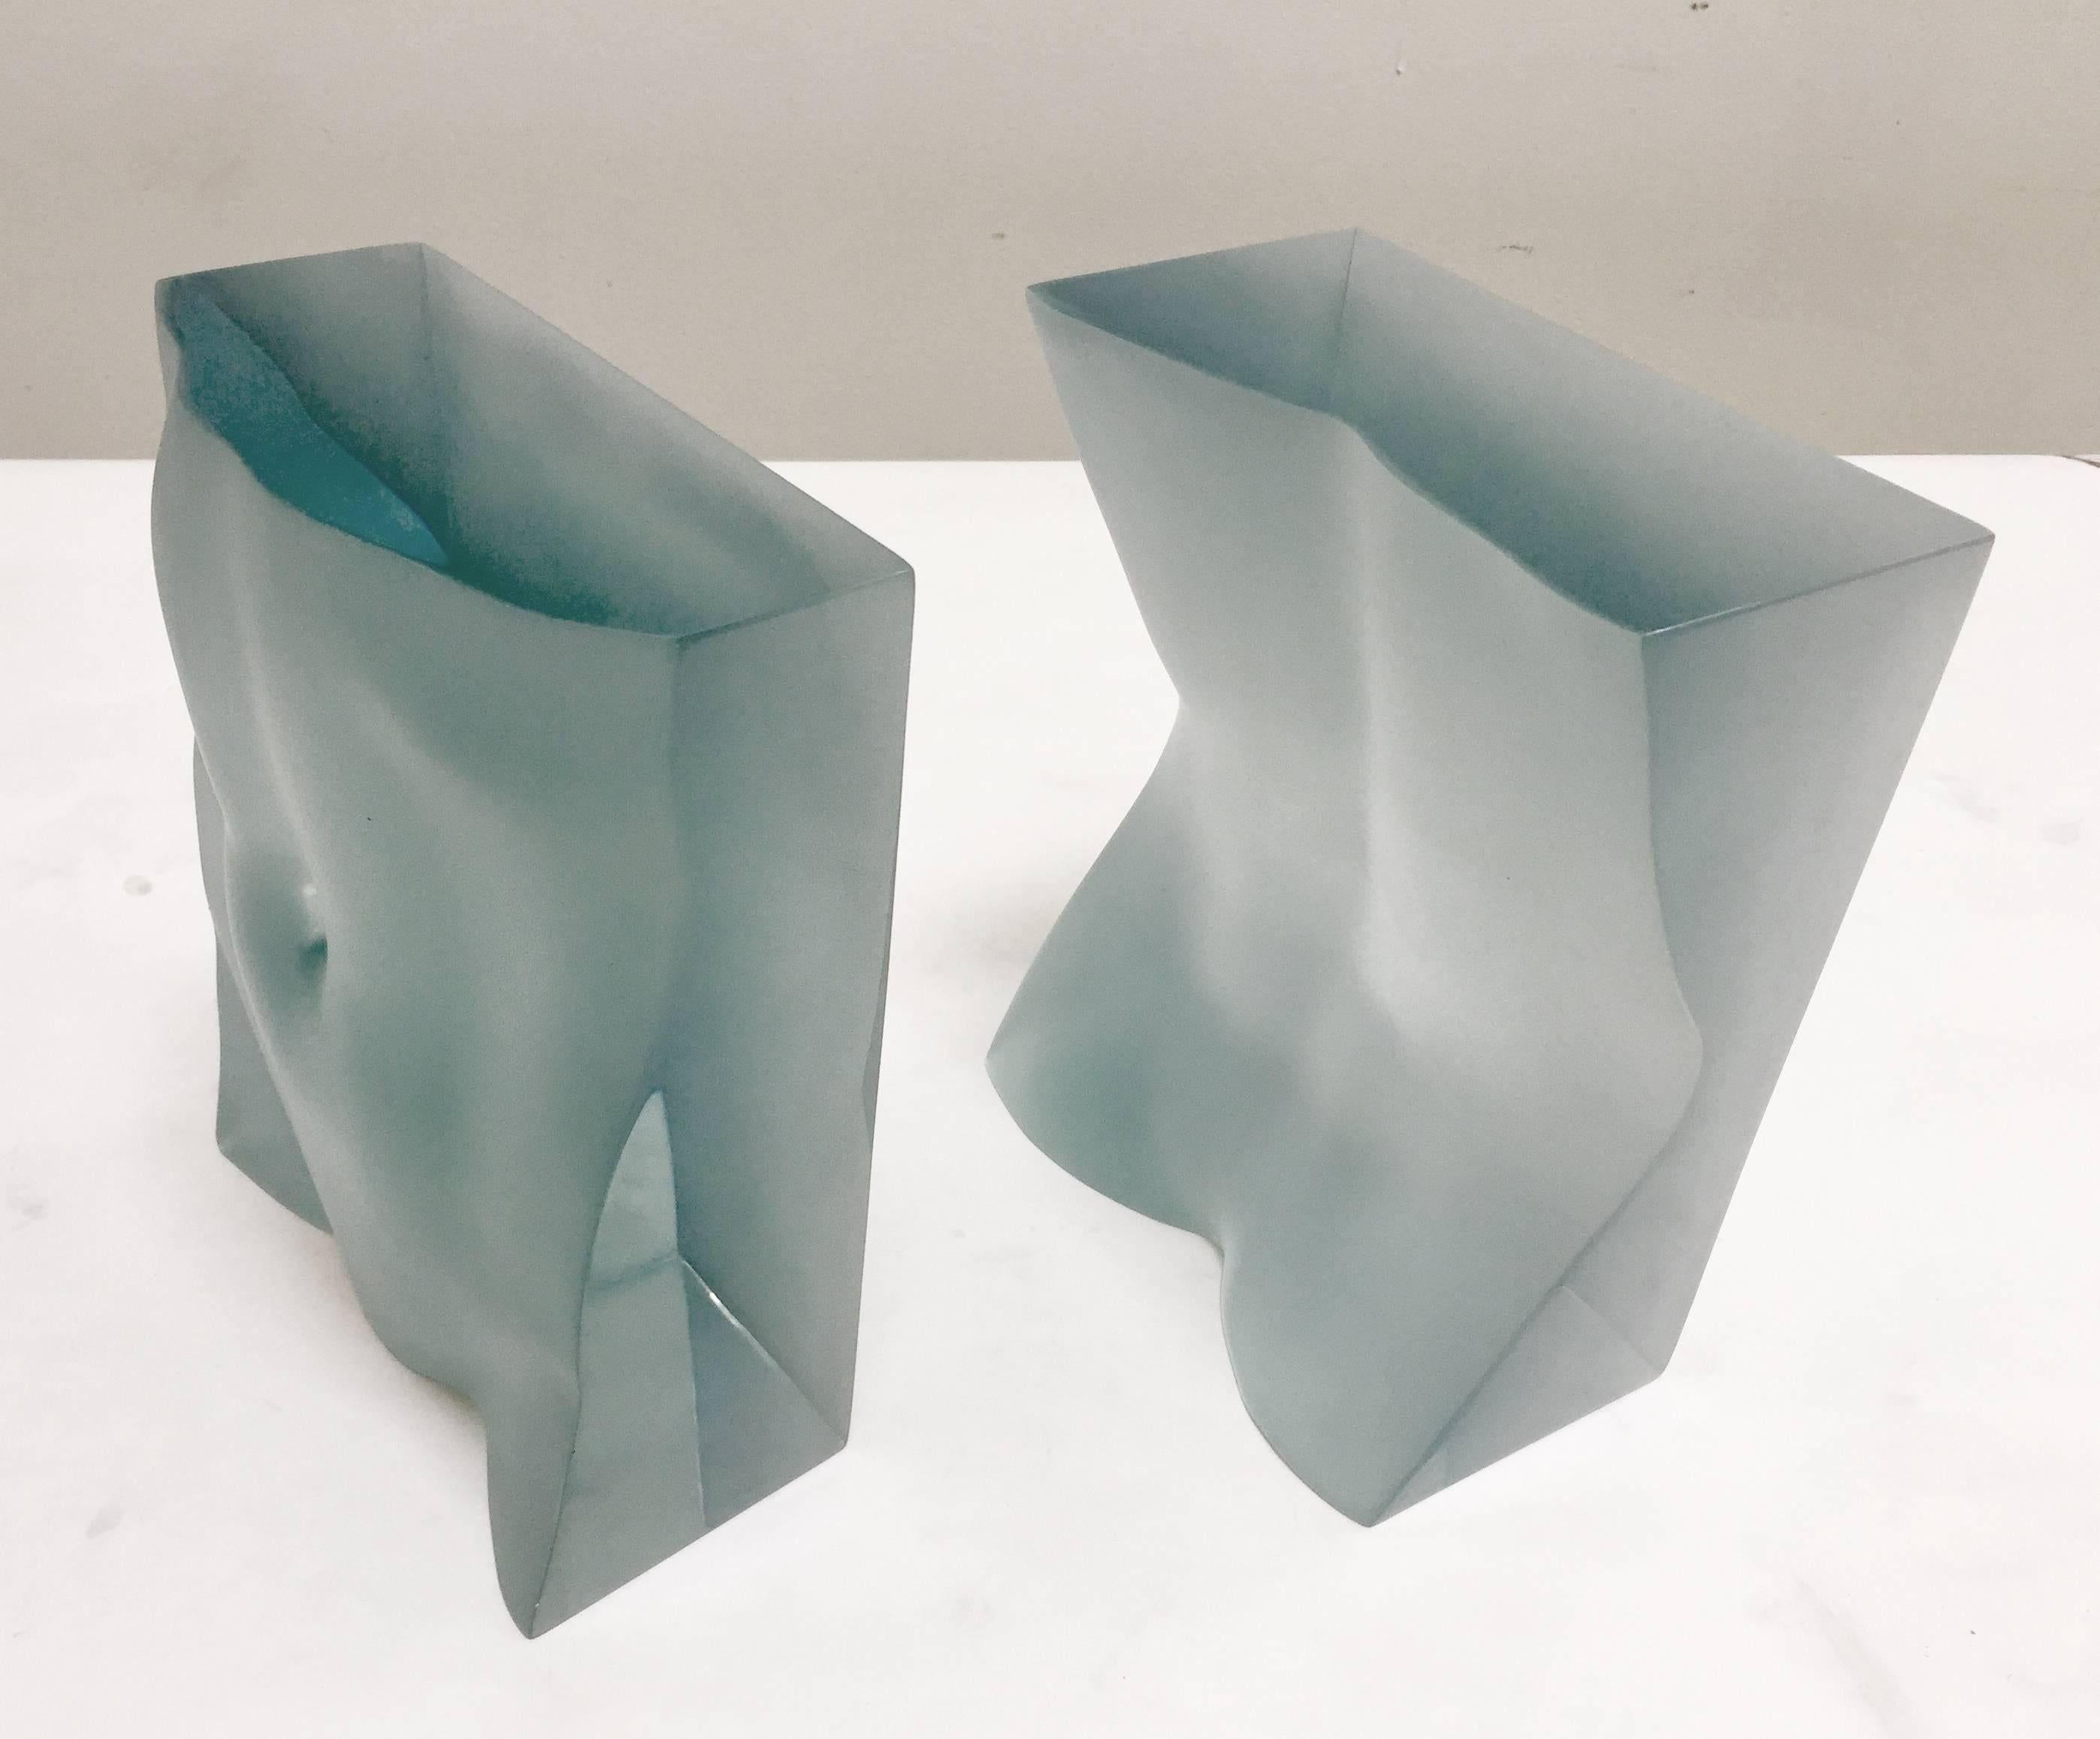 A stunning sculptural pair of bookends designed and produced by artist, Tanya Ragir. They are fabricated in transparent aqua Lucite in a limited edition of 25 but are also available in colored cast stone, white cast stone, or stainless steel